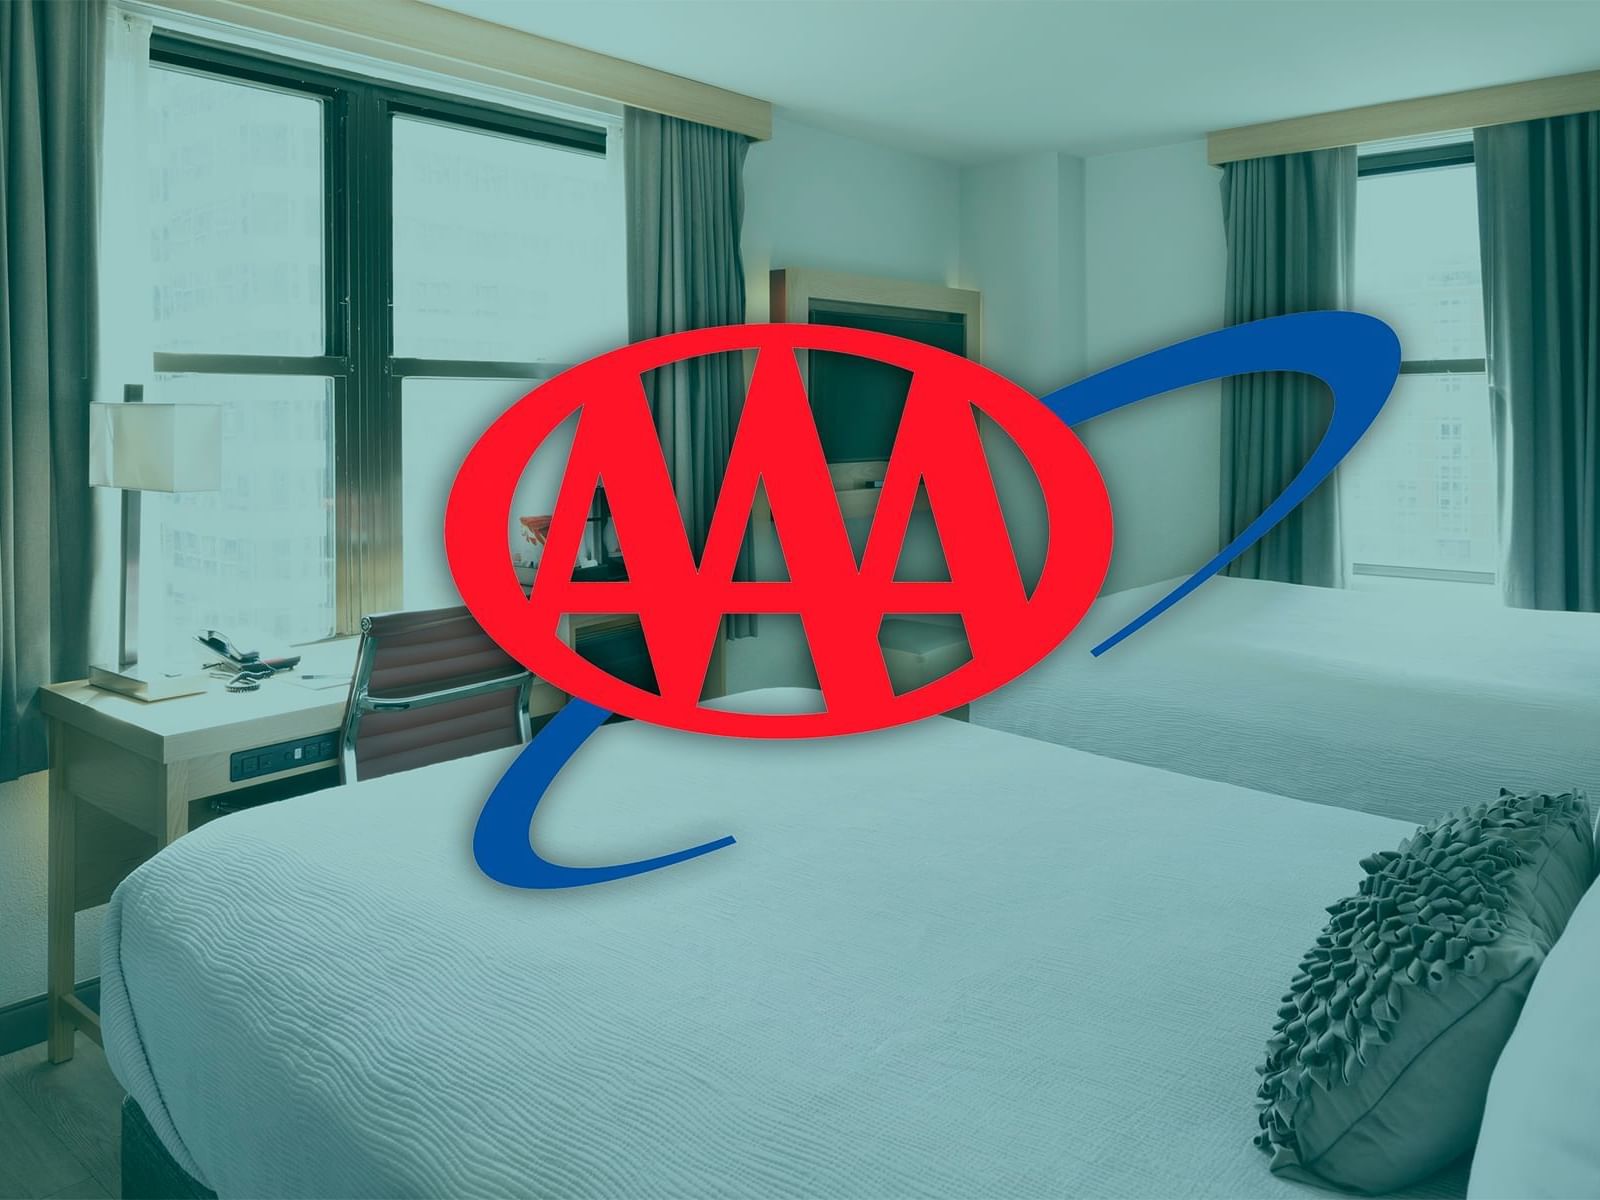 The AAA rate is available at Hotel Saint Clair for members.